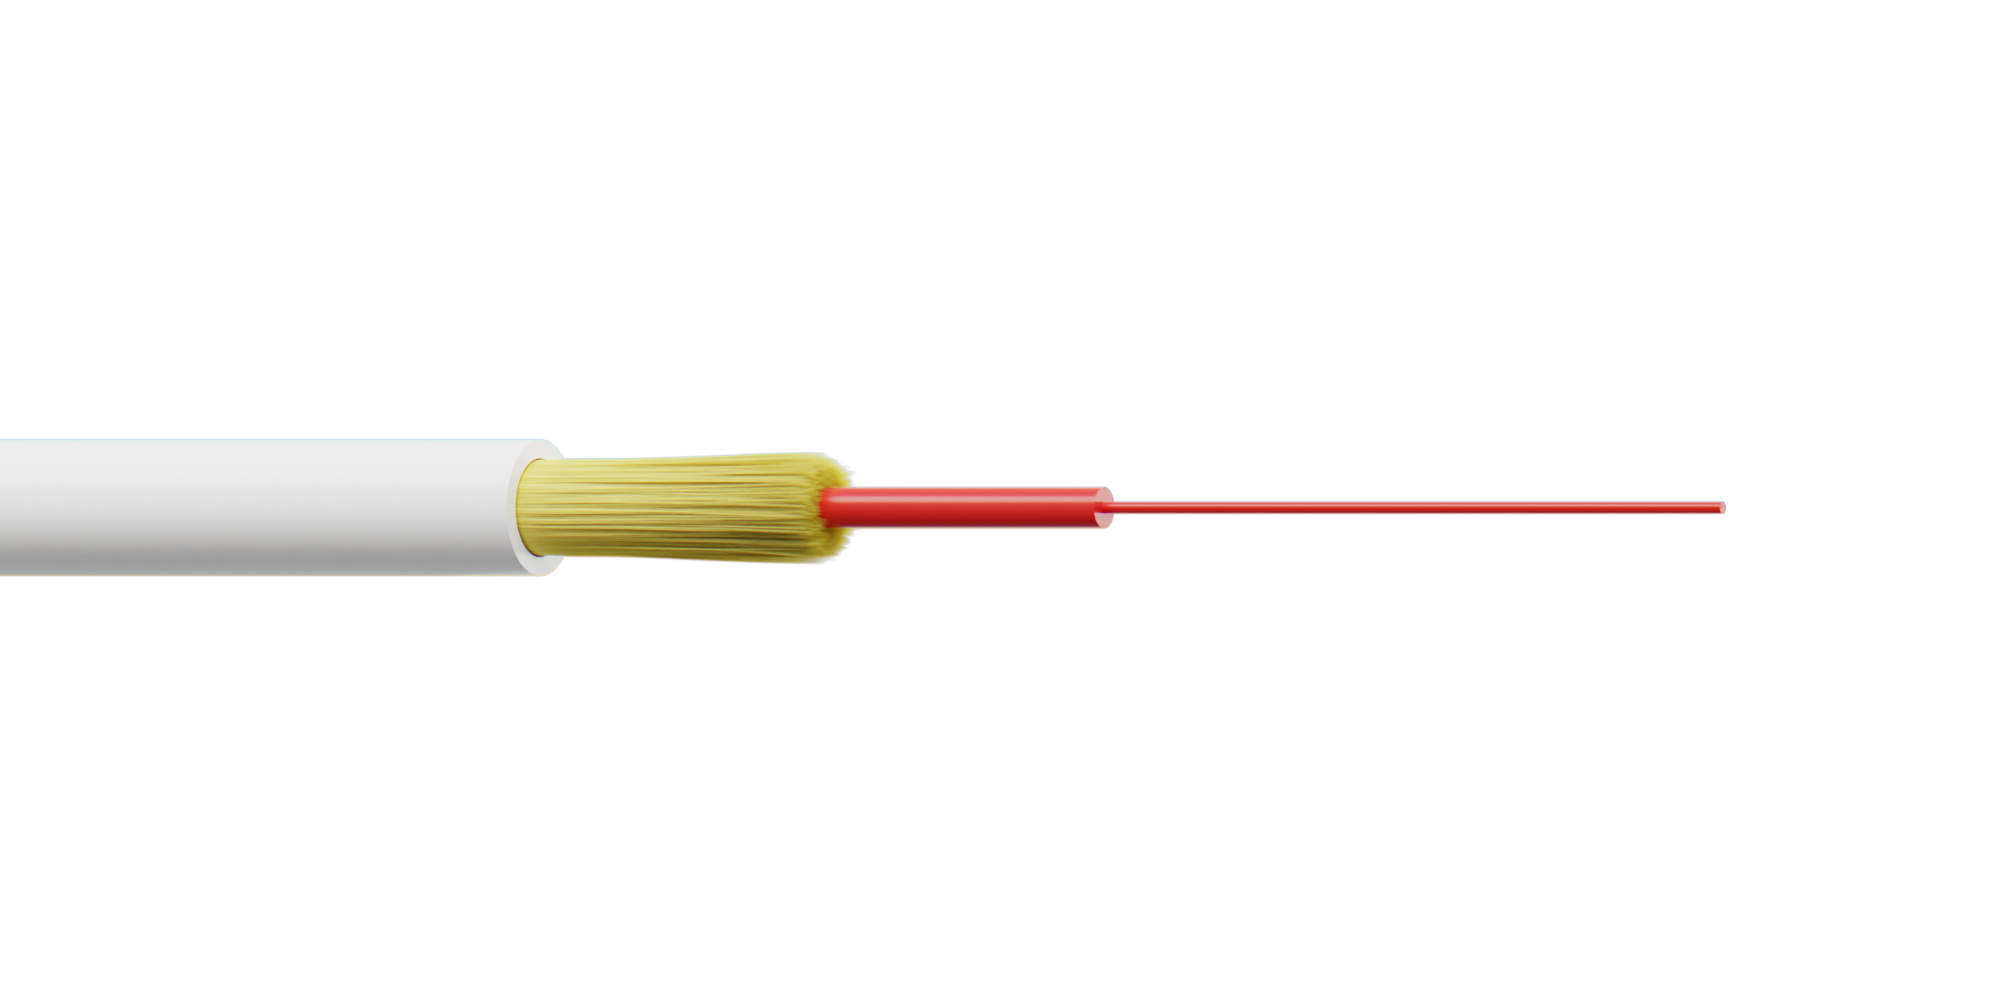 VC-D30 Drop Cable3mm diameter, CPR Dca - Polish producer in photonics .